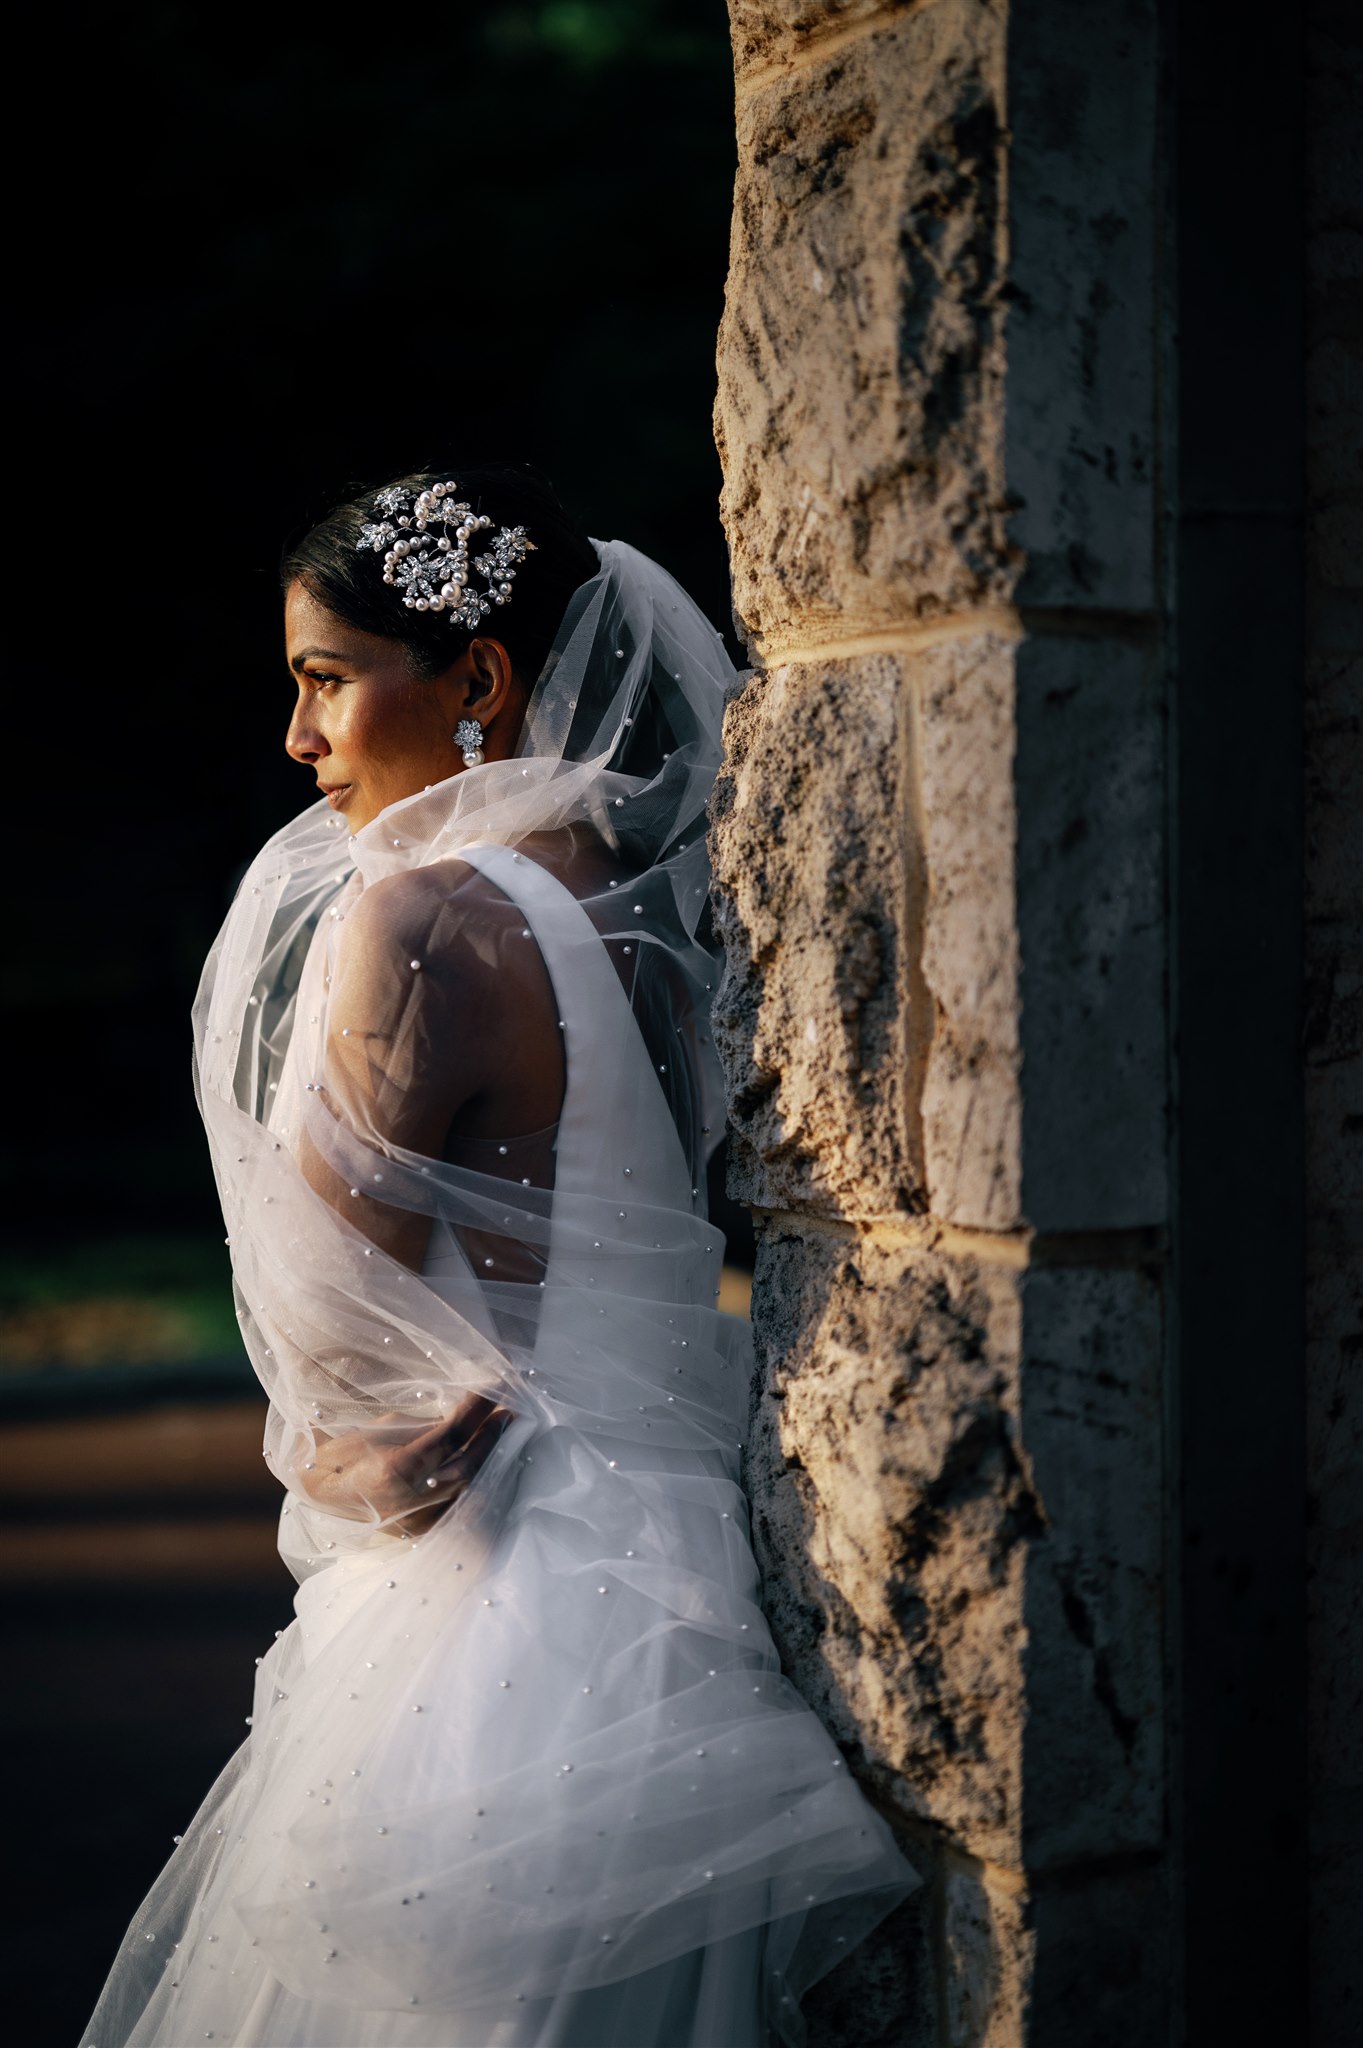 Pearl Tulle Wedding Veil by Dreamtime Designs